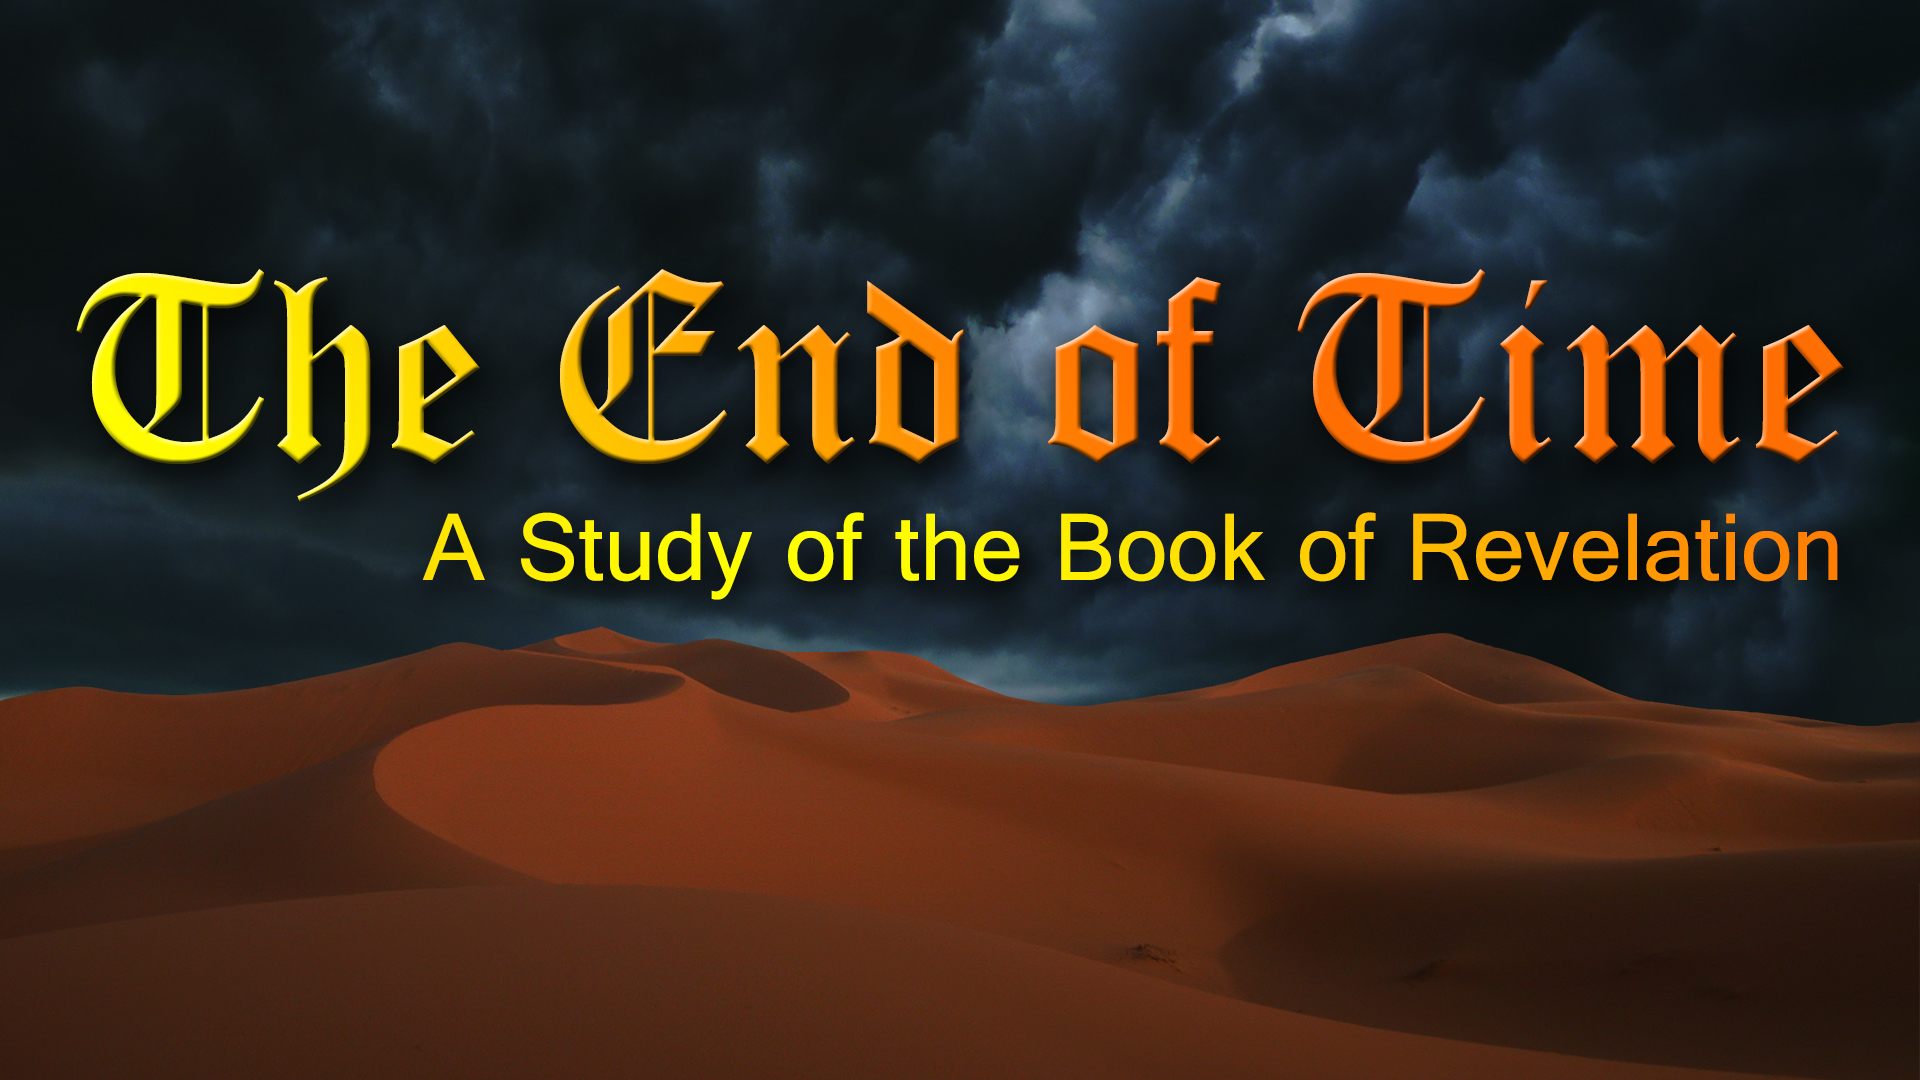 The End of Time: A Study of the Book of Revelation